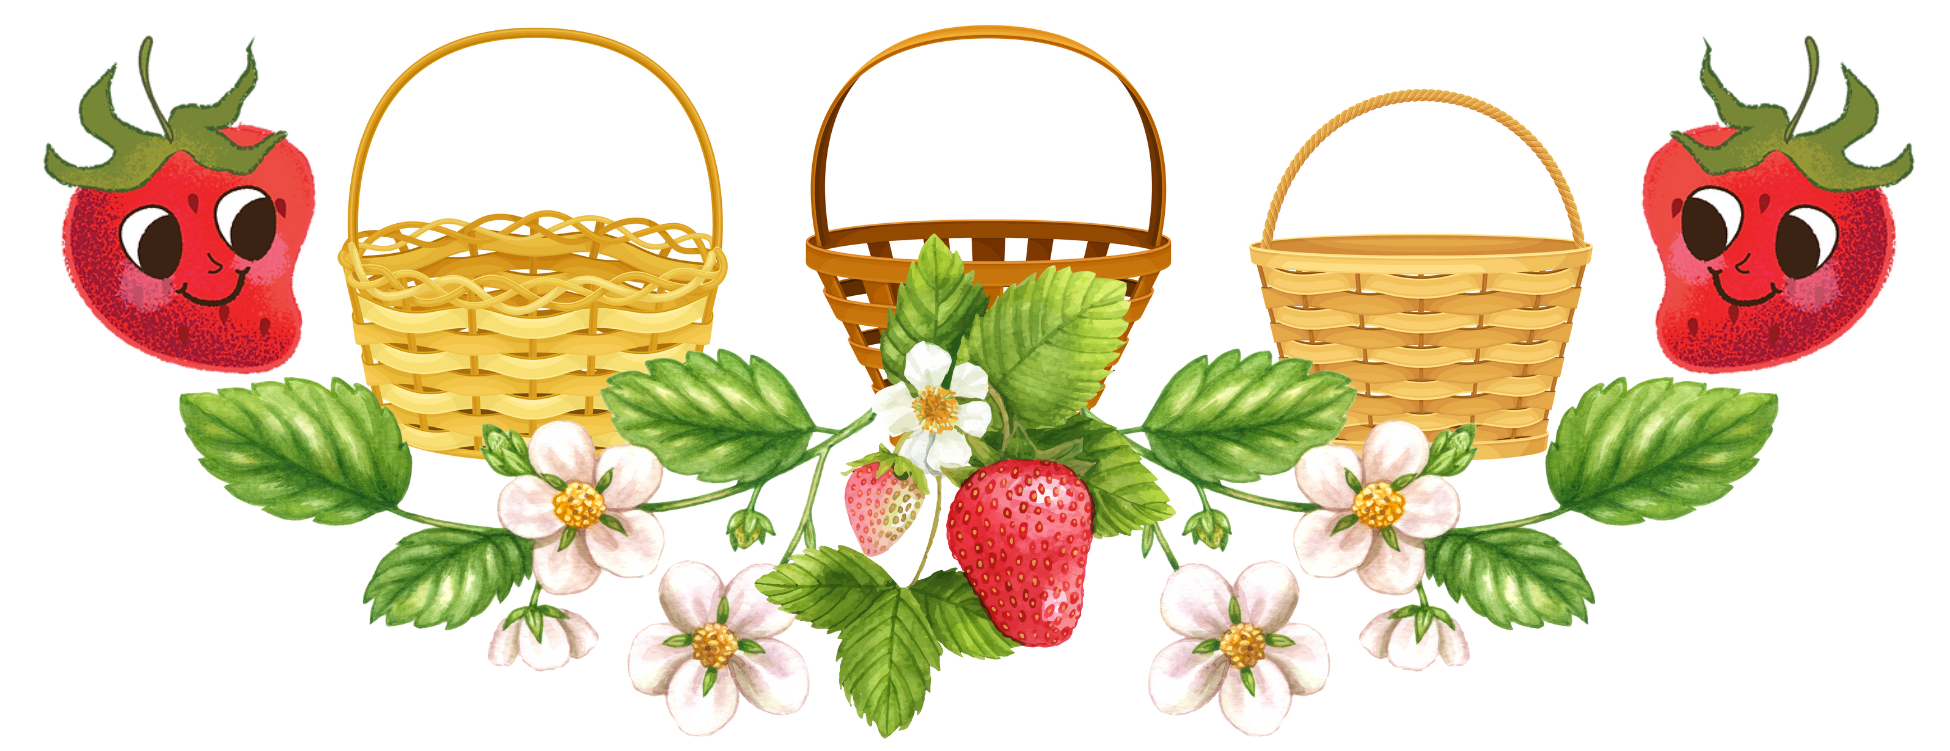 Animated image of three strawberry baskets in a row with two strawberries with cute faces at the ends of the row. Below is a strawberry plant with flowers and strawberries attached to the vine